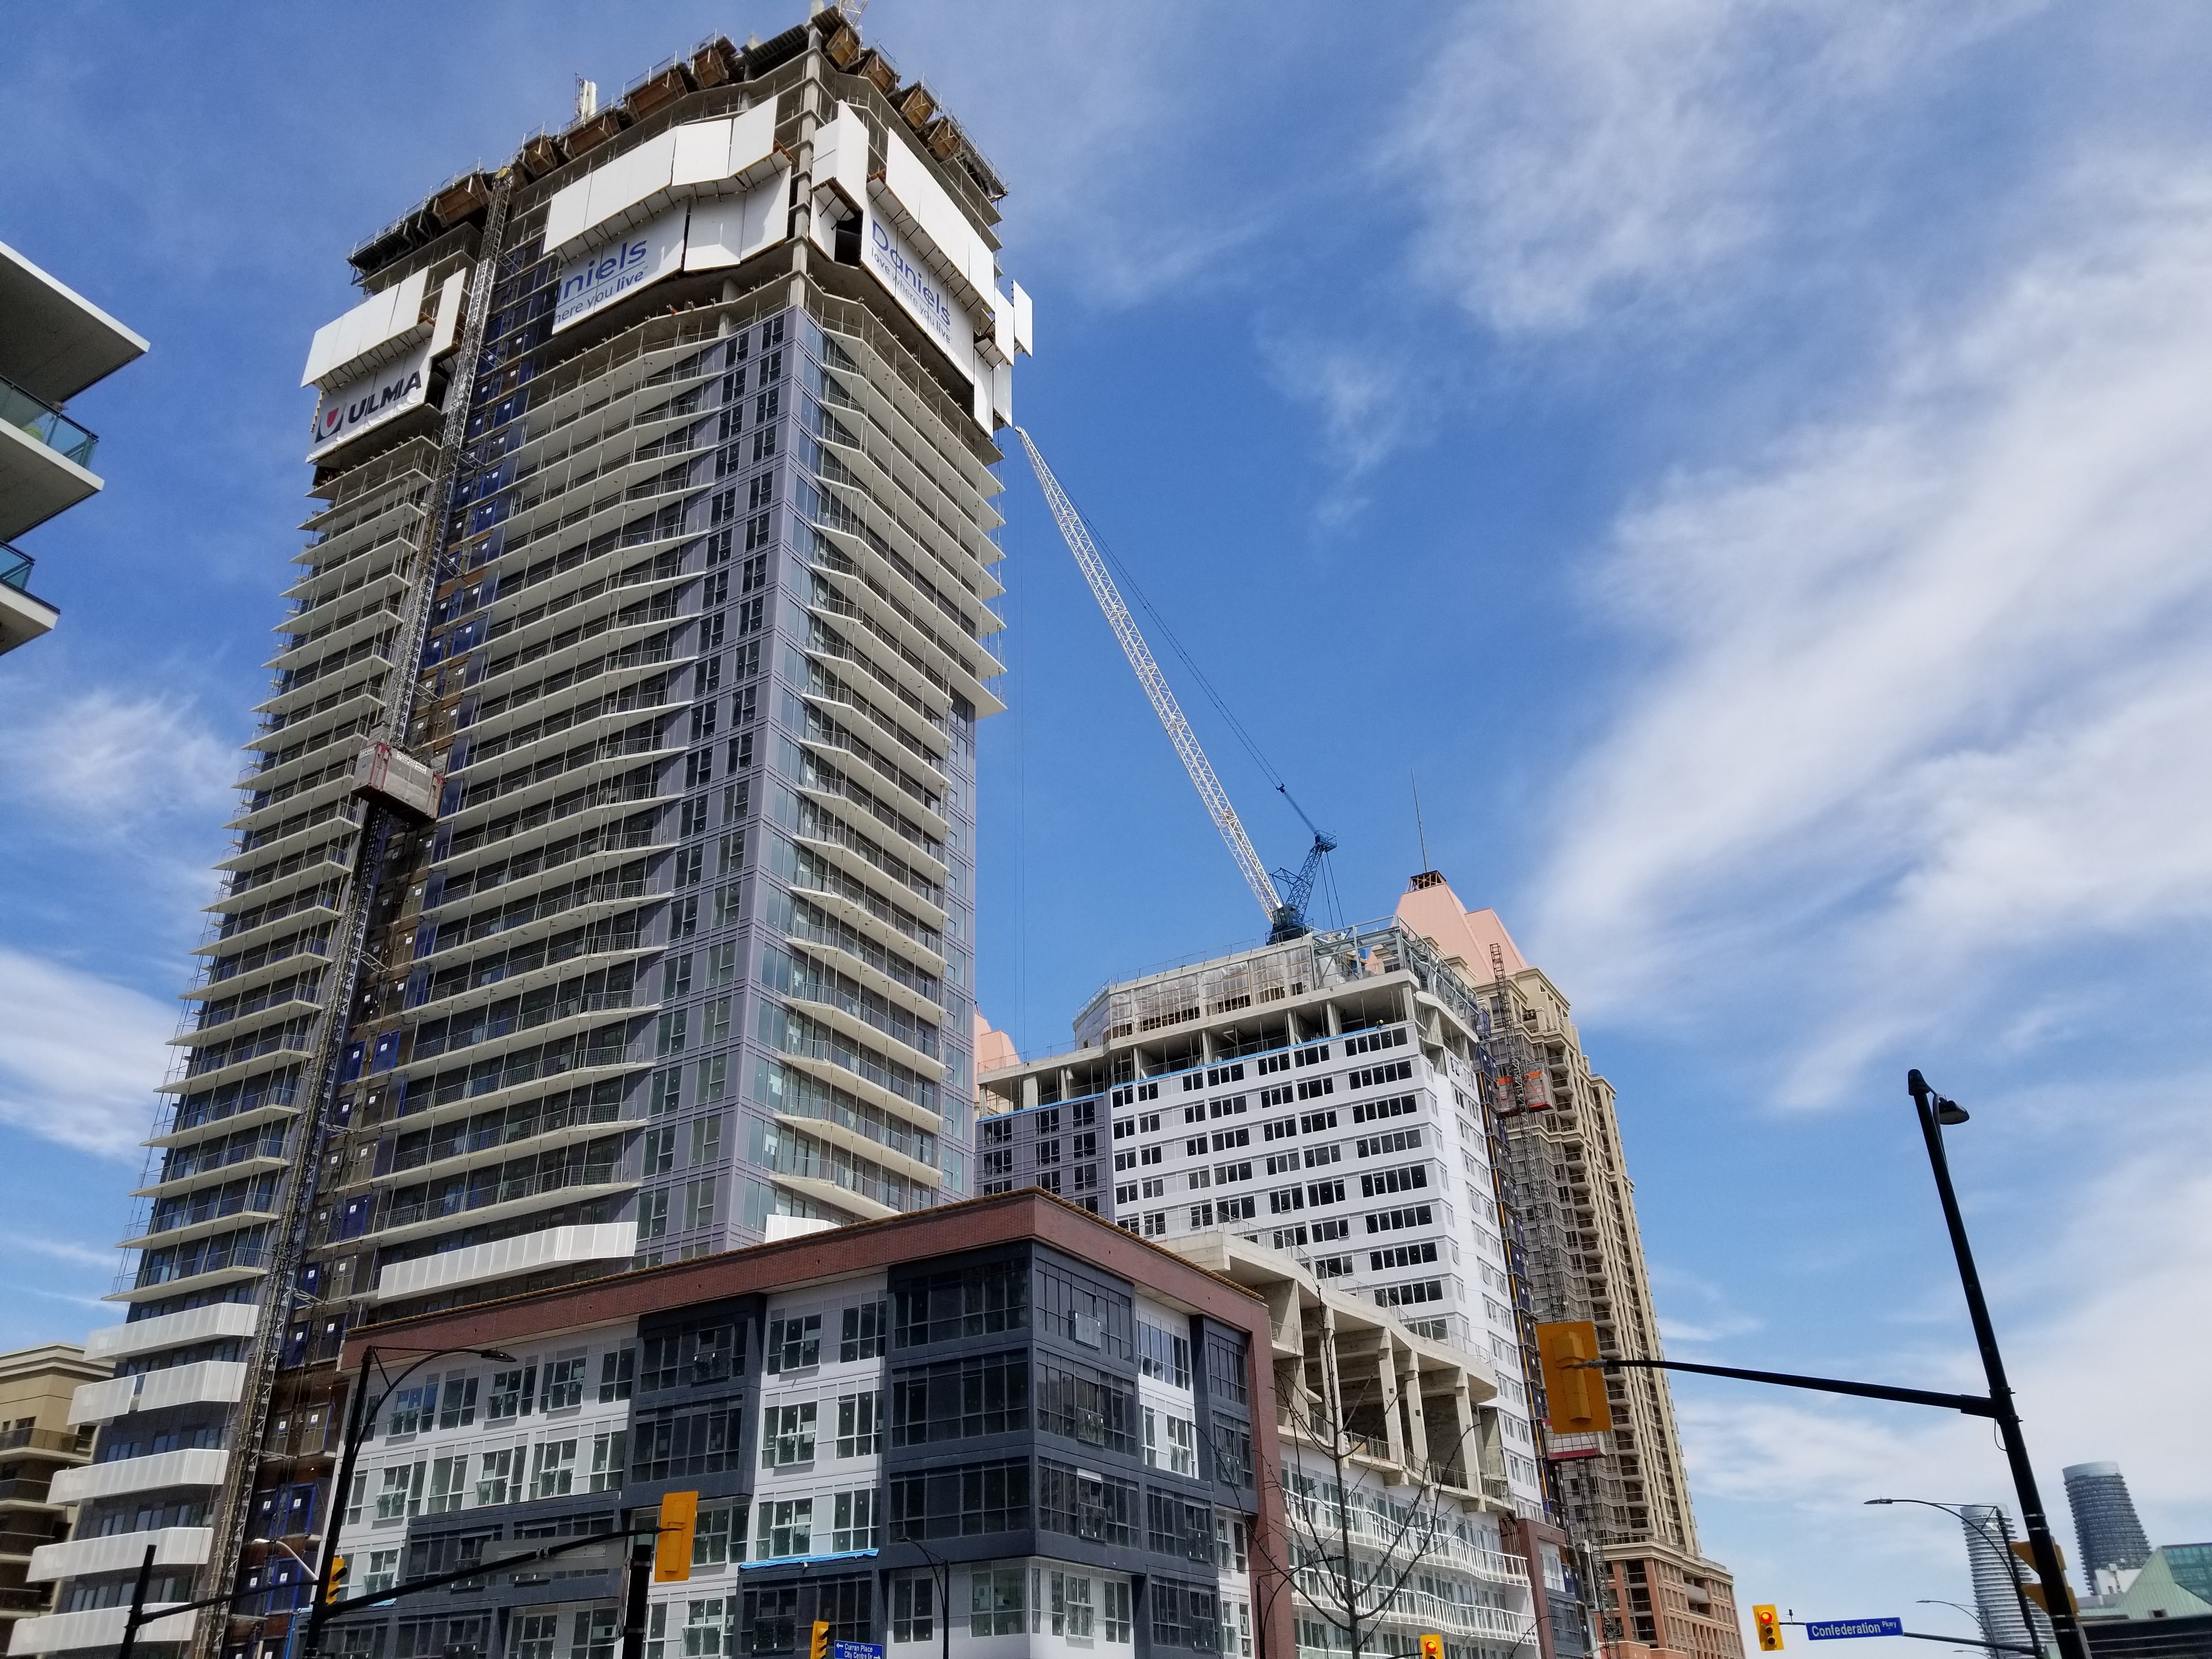 New Condos in Square One, Mississauga: 2020 Update daniels wesley condos square one mississauga 2